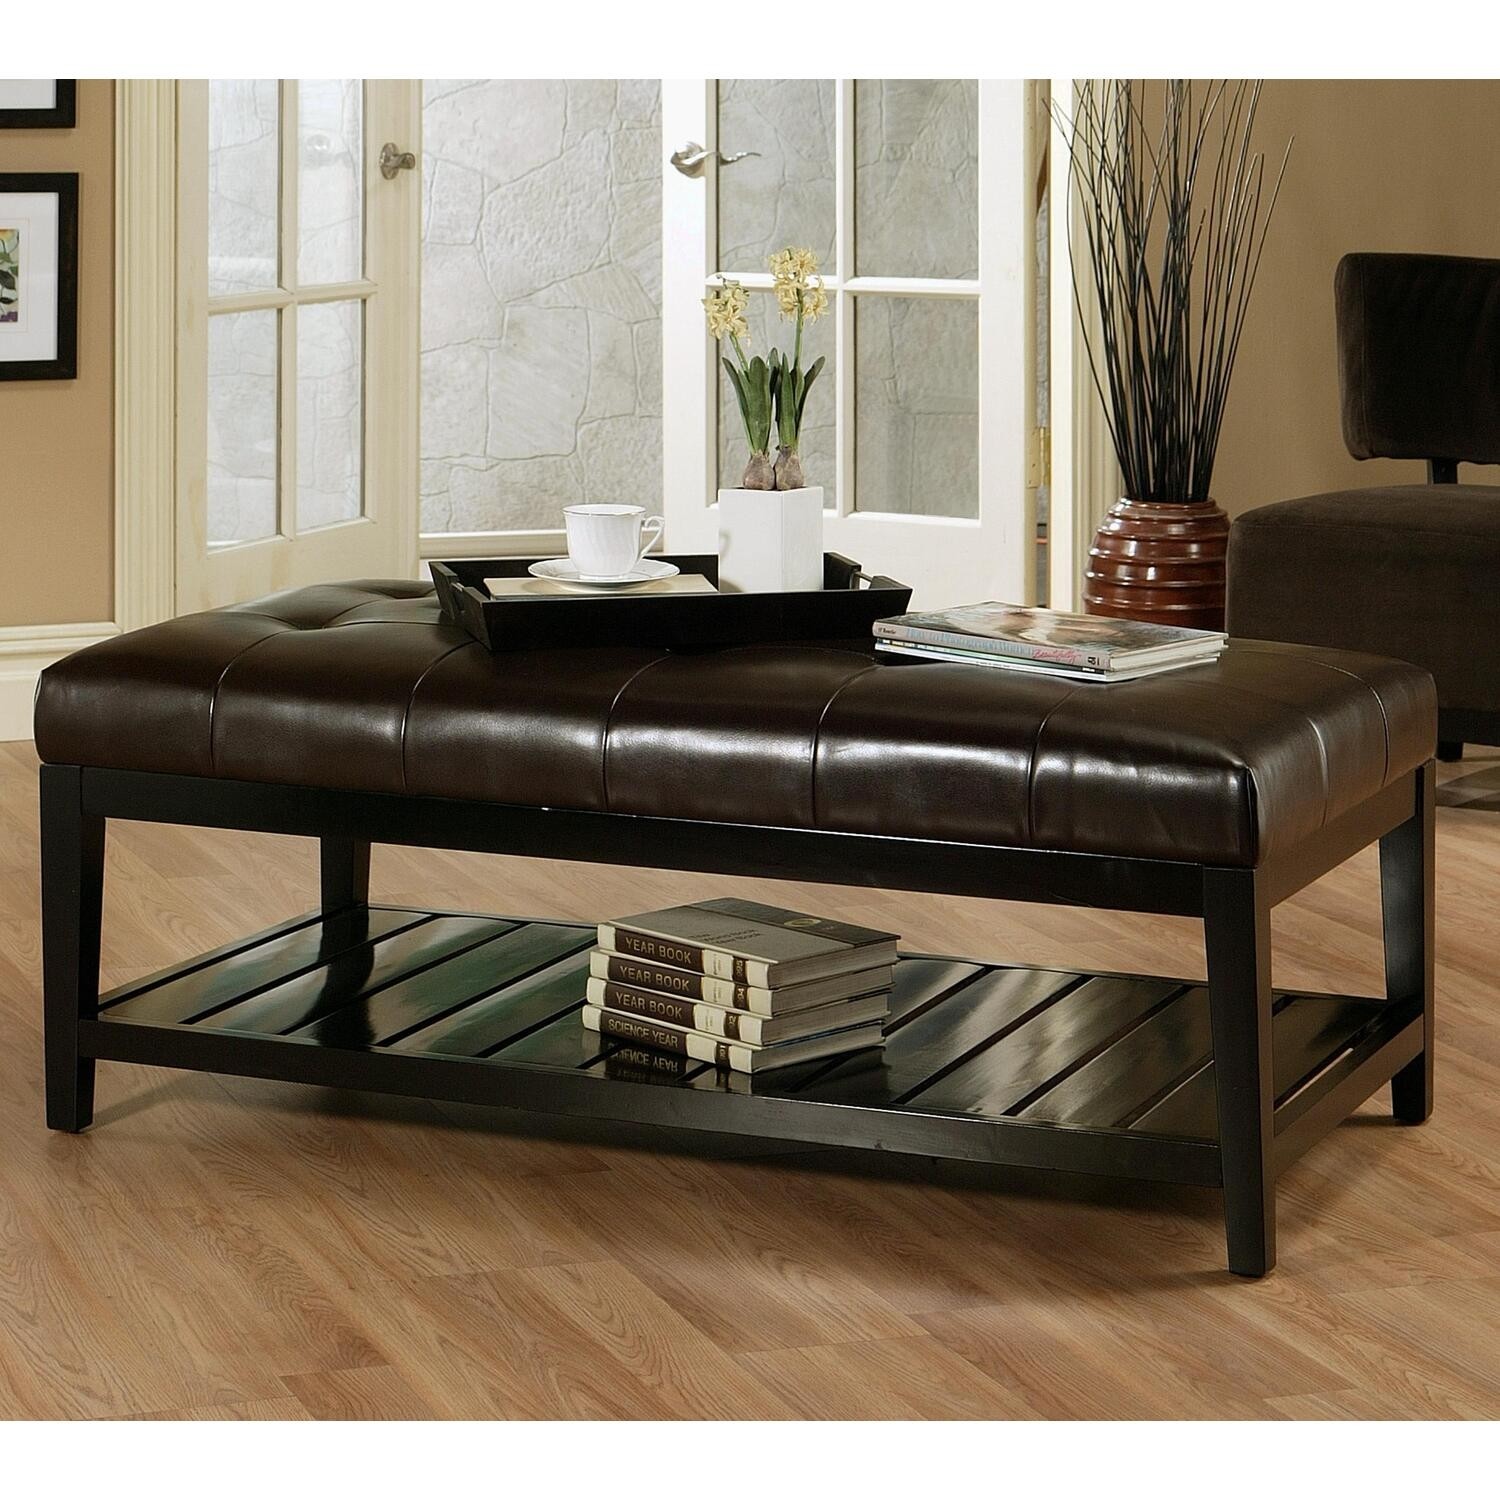 Abbyson living bicast tufted leather coffee table ottoman